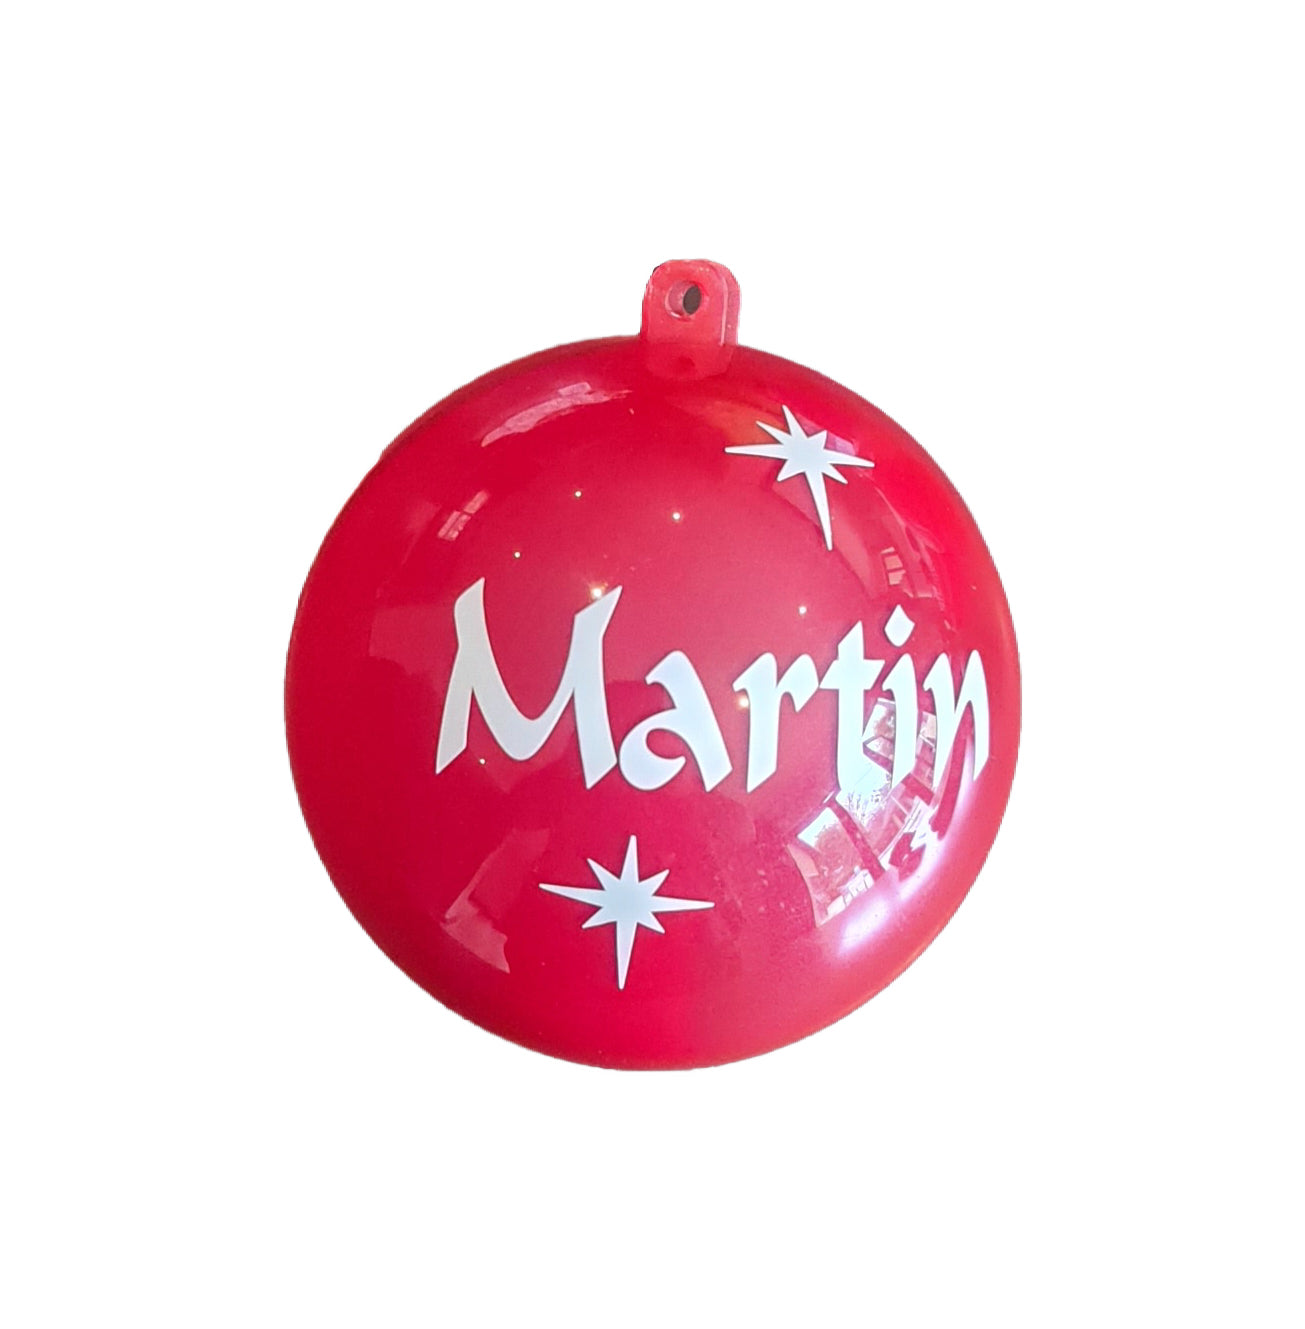 80mm red personalised gift bauble. Christmas or special occasions